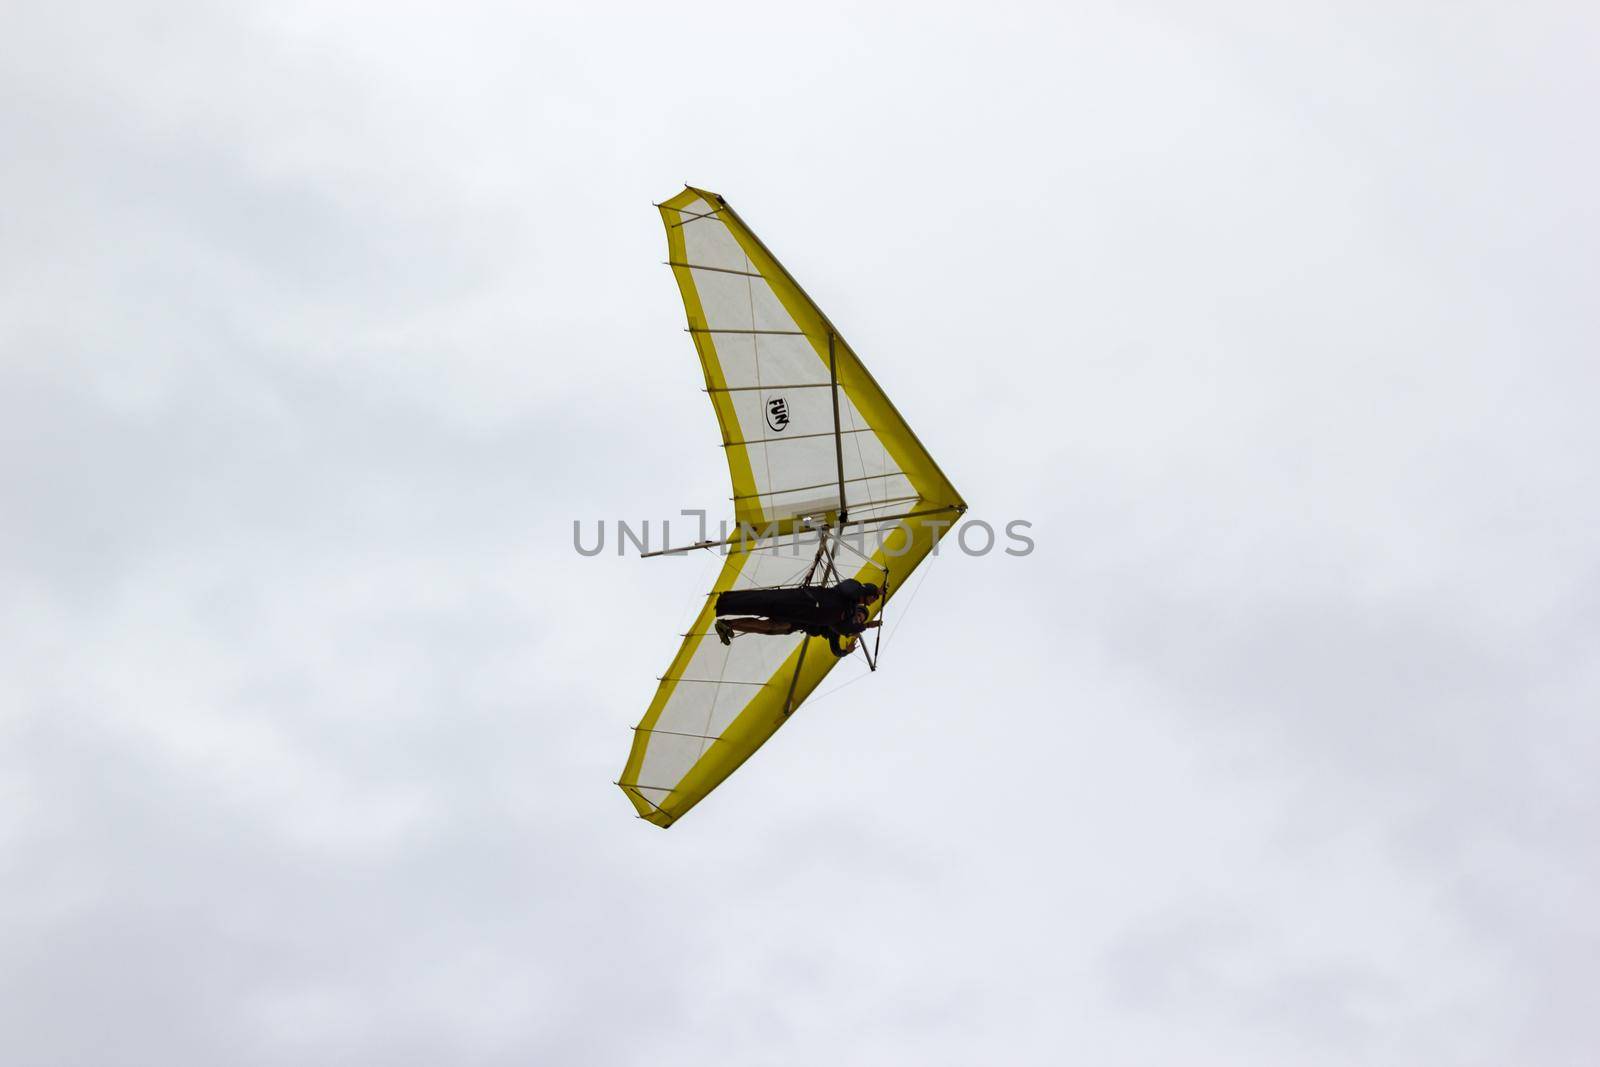 Hang glider flying in Newcastle, New South Wales, Australia